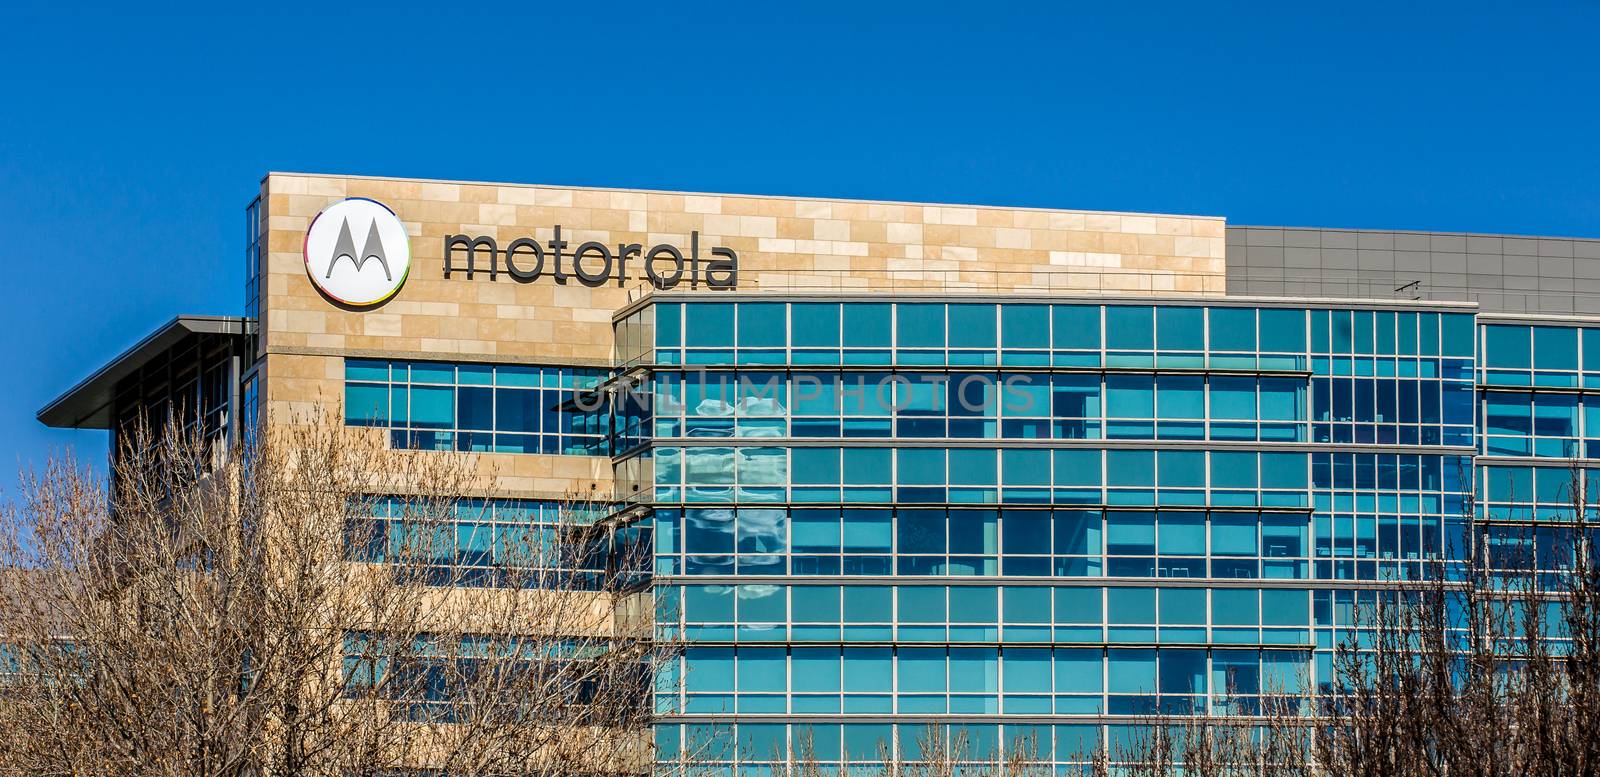 Motorola Headquarters in Silicon Valley by wolterk